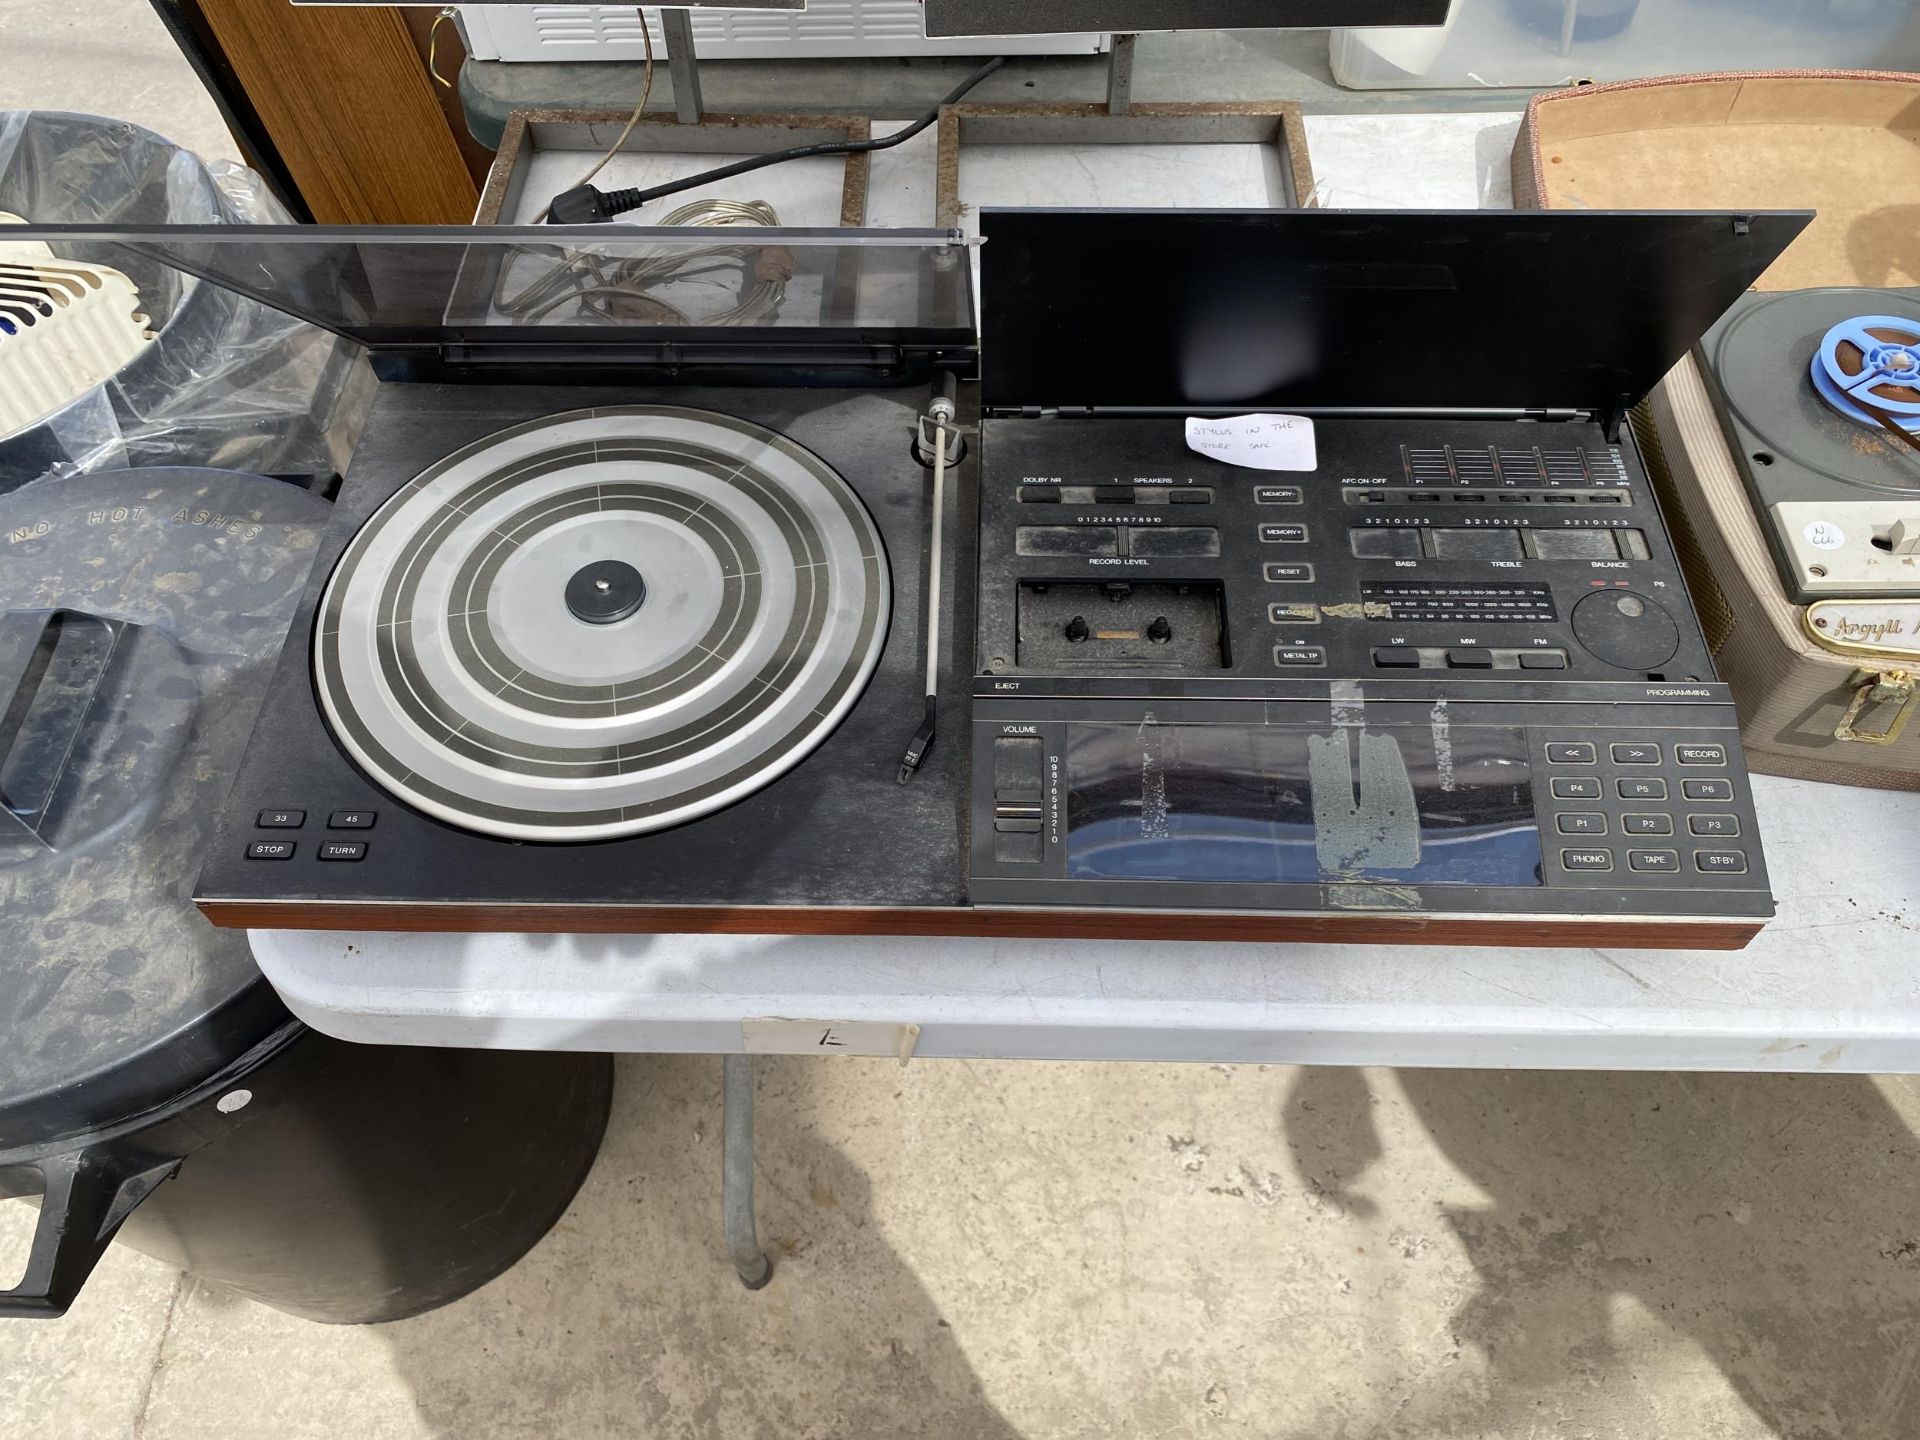 A BANG AND OULFSEN BEOCENTER 5000 RECORD DECK WITH BANG AND OULFSEN MMC 20E STYLUS WHICH IS BELIEVED